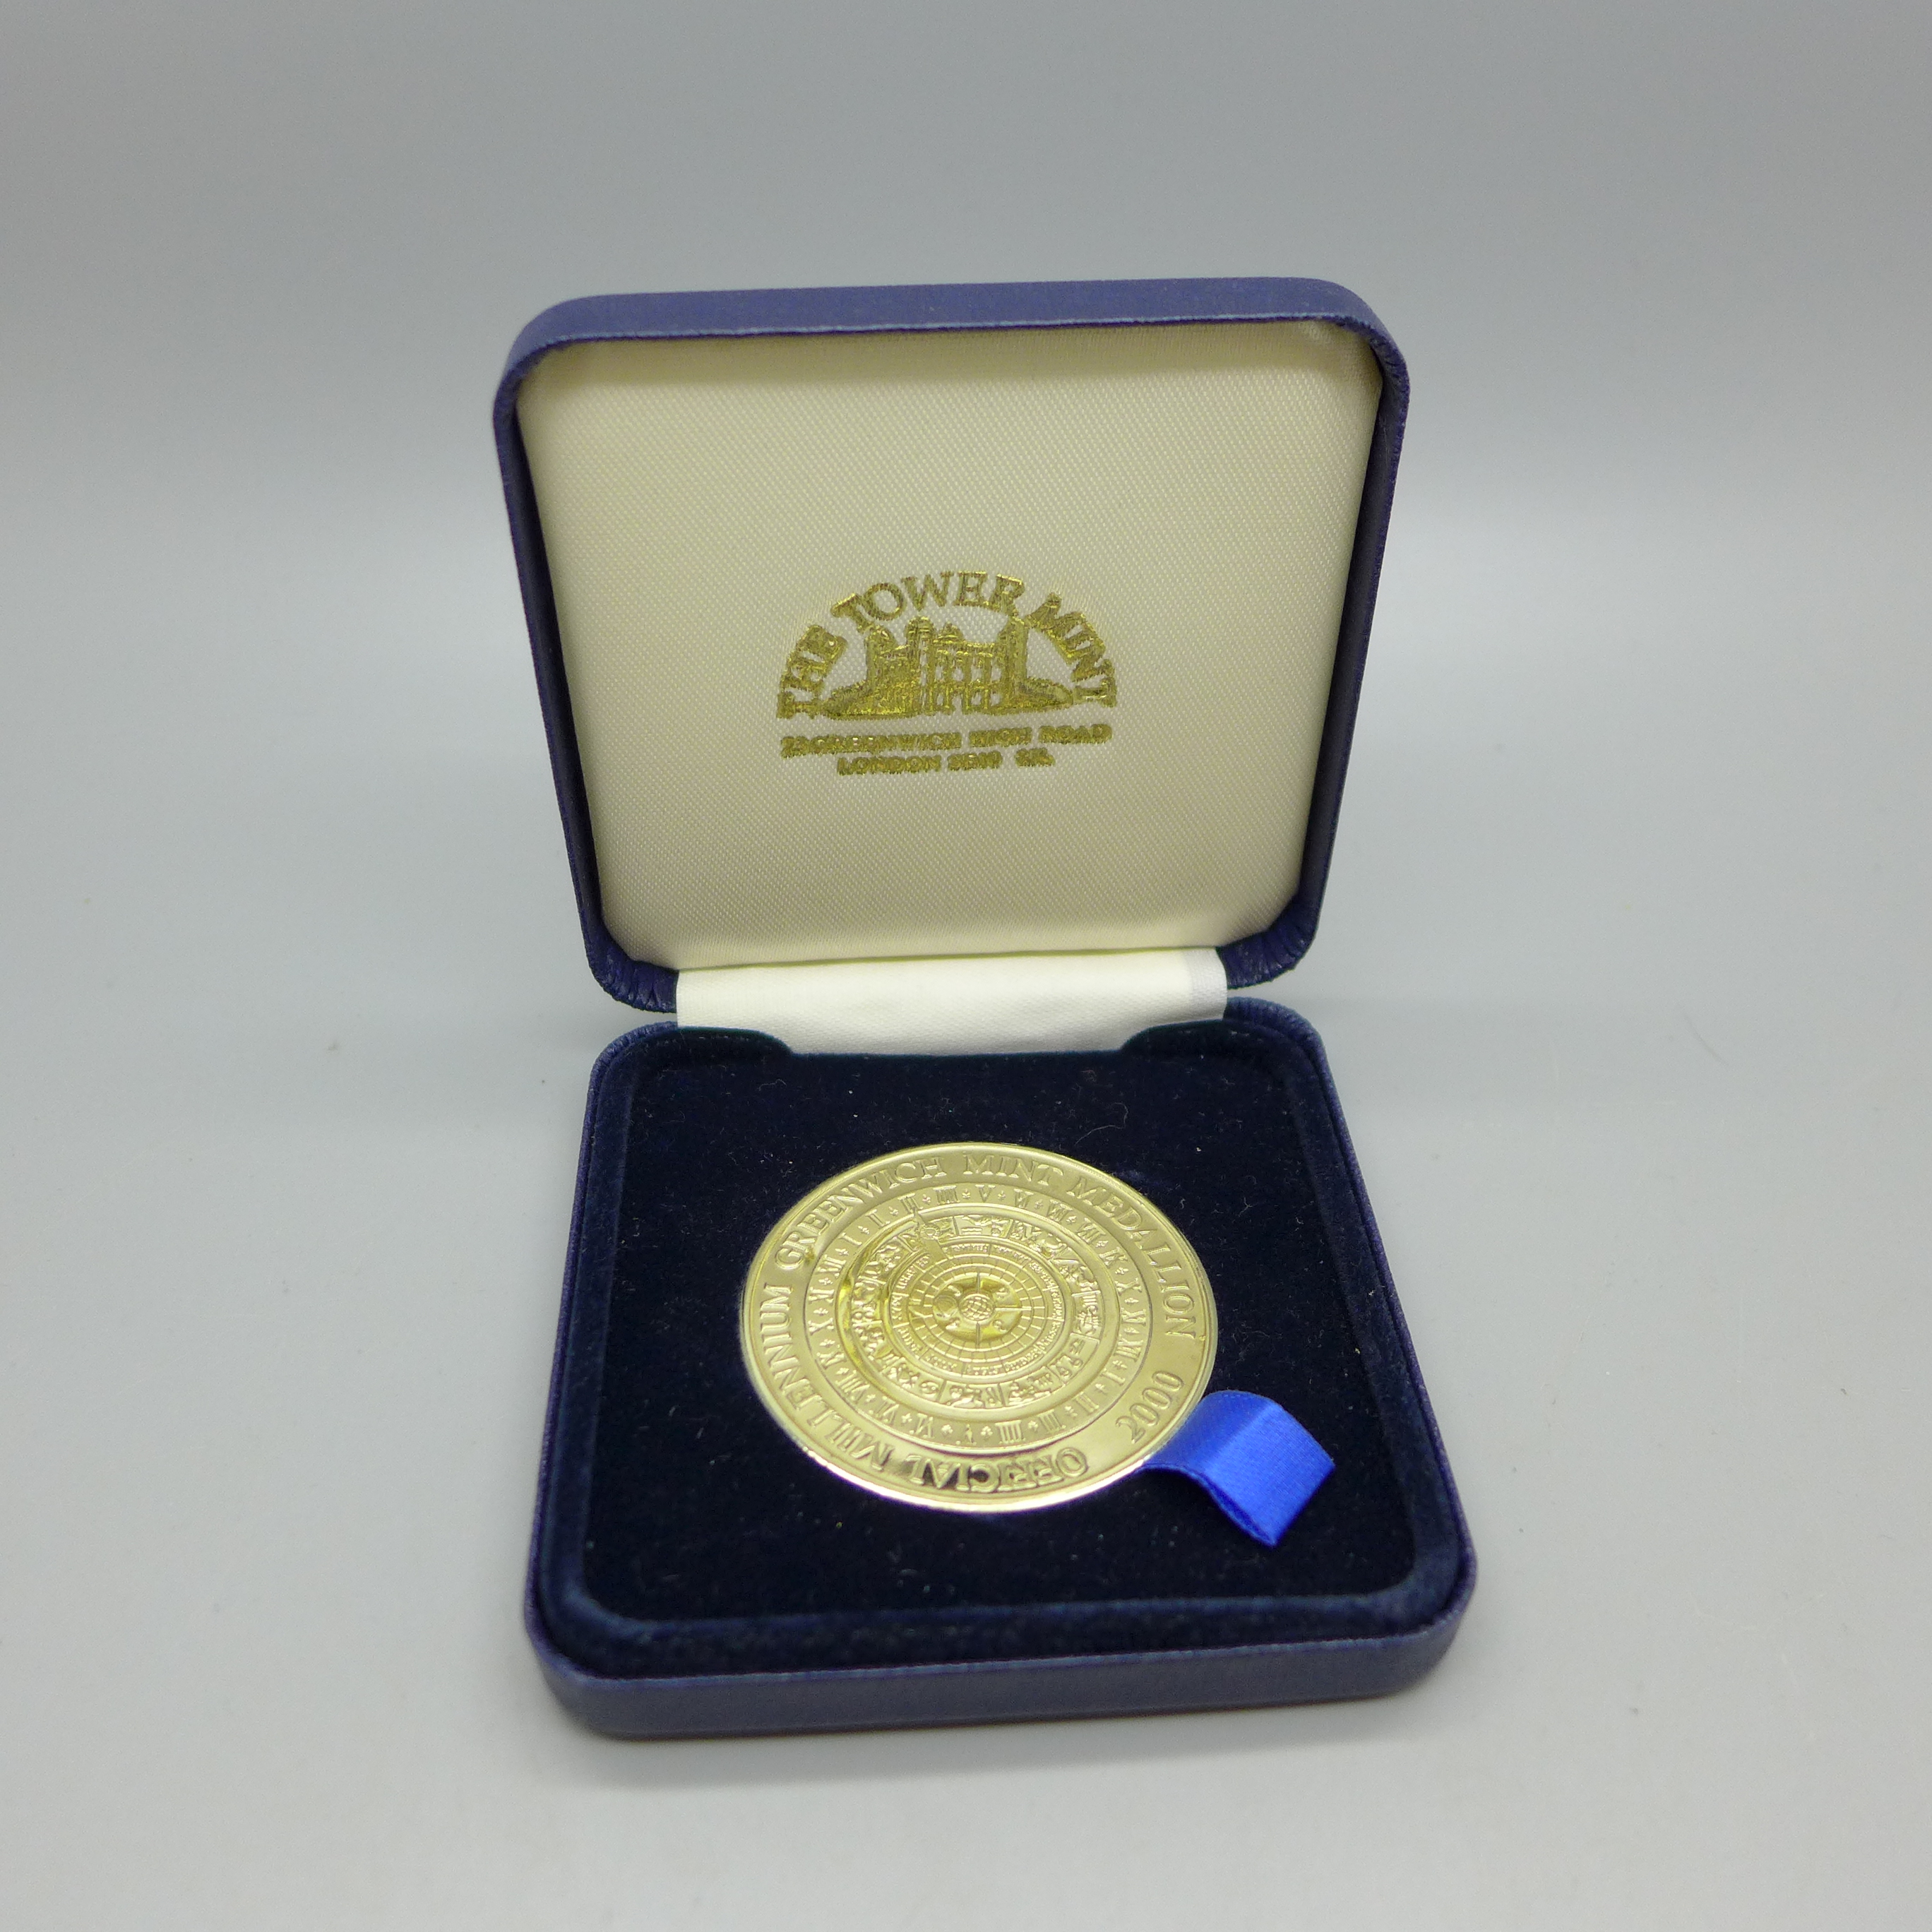 A Greenwich mint medallion, Yr 2000, in fitted case